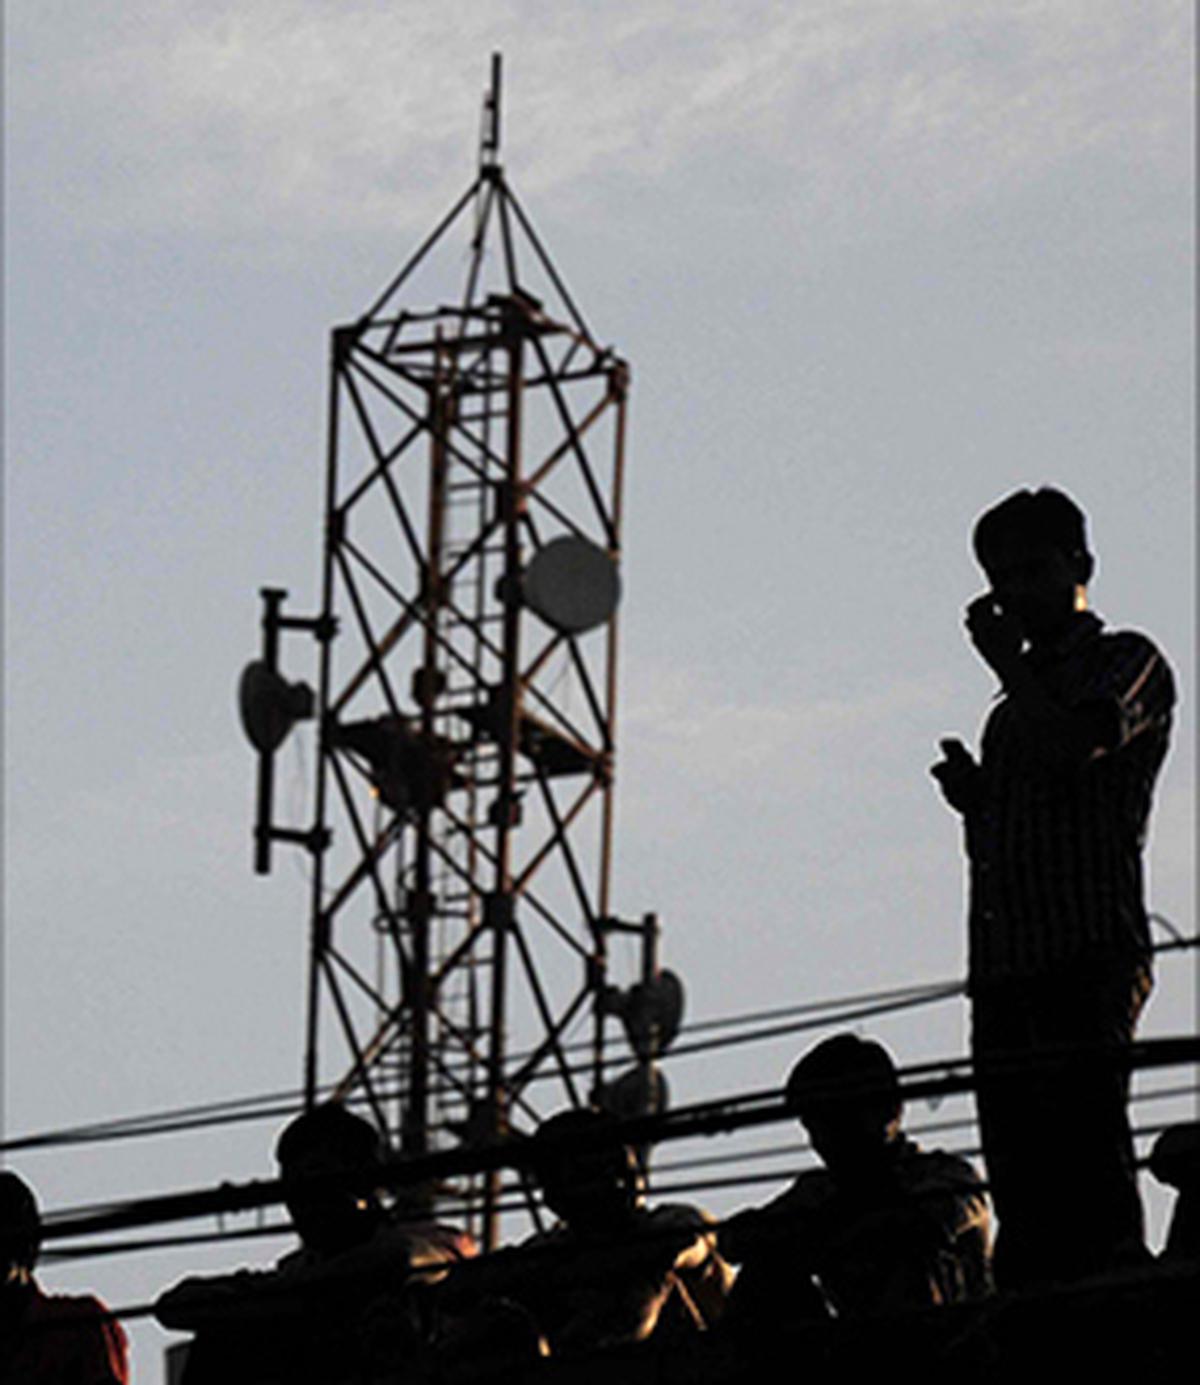 DoT extends deadline for public comments on draft Telecom Bill to Nov 20